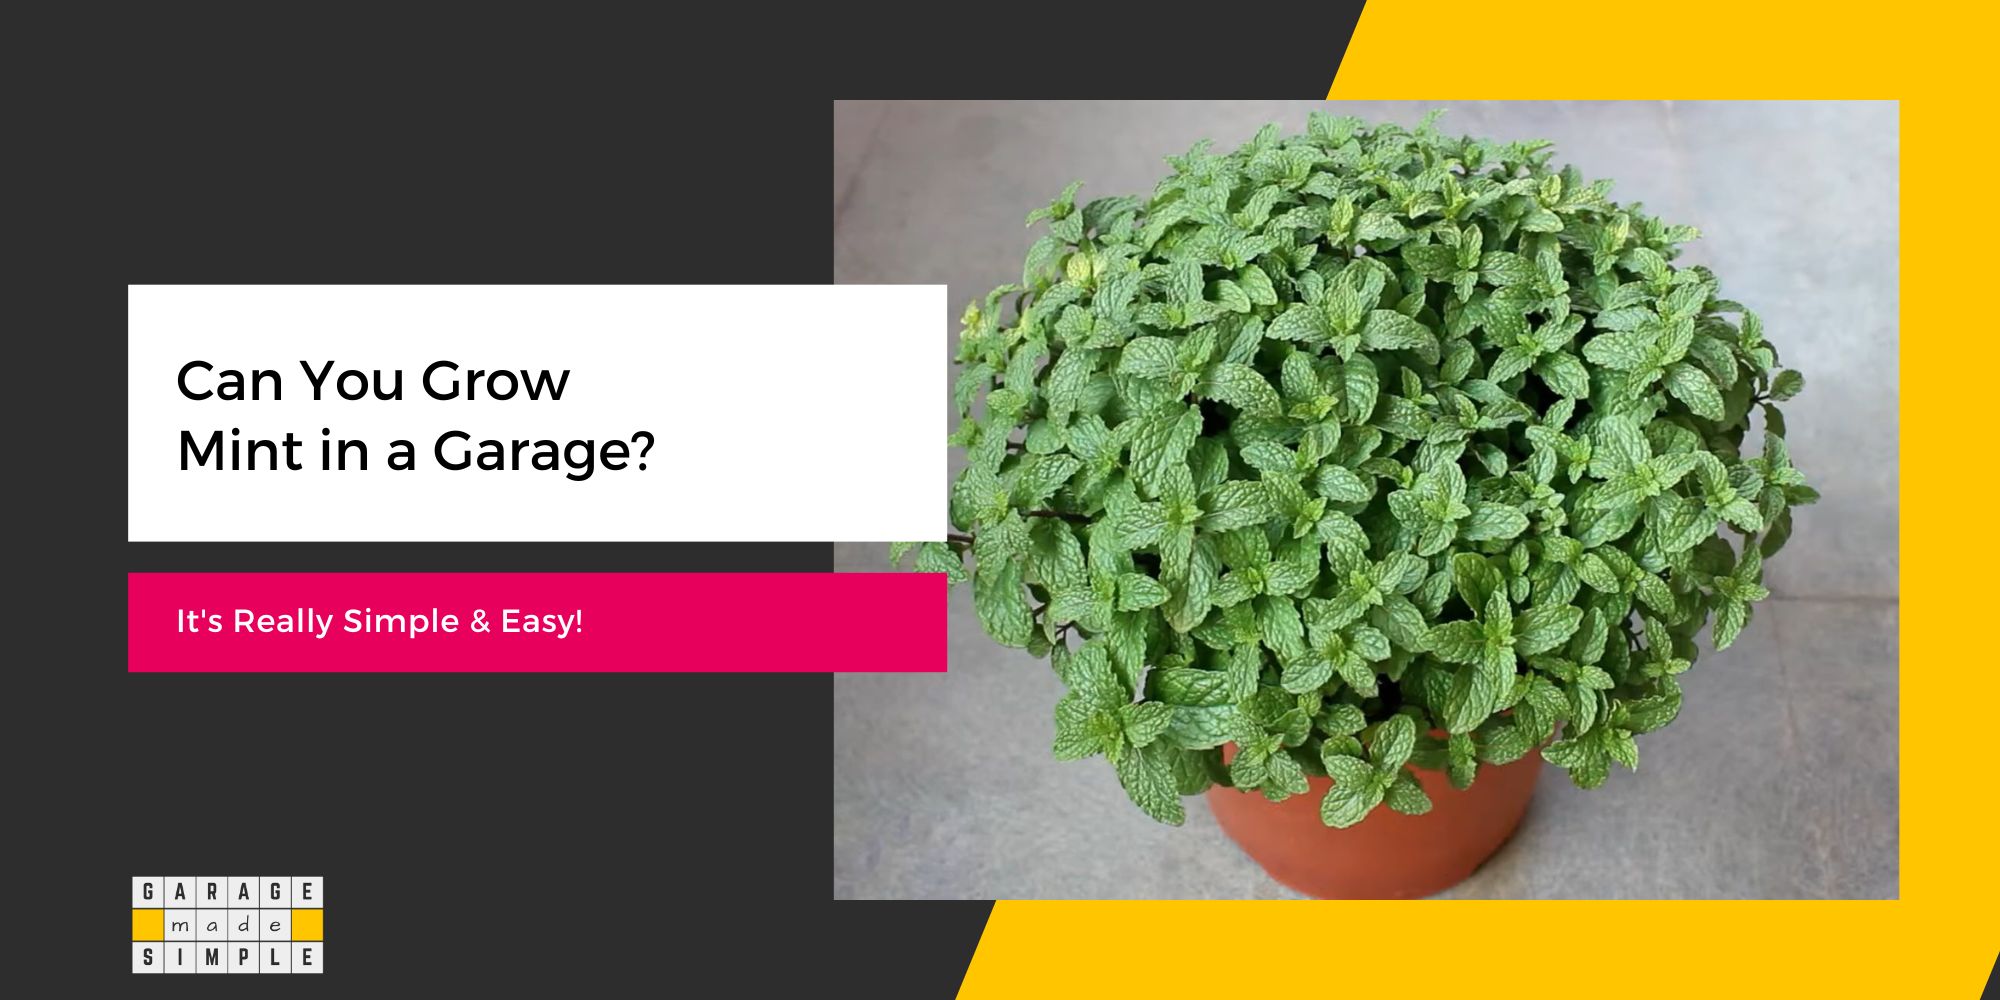 Can You Grow Mint in a Garage? It’s Really Simple & Easy!